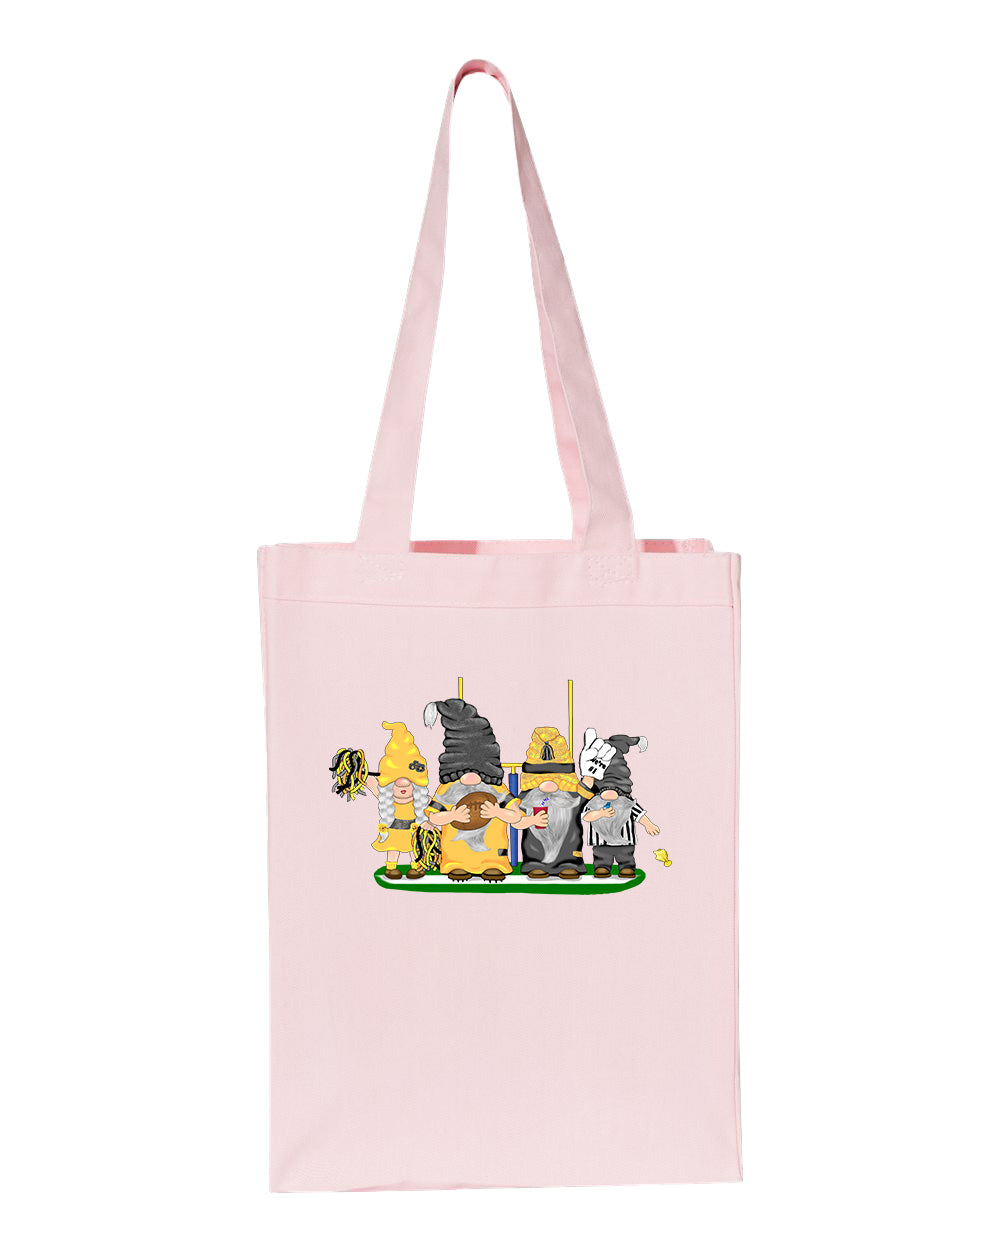 Black & Gold Football Gnomes  (similar to Pittsburgh) on Gusset Tote